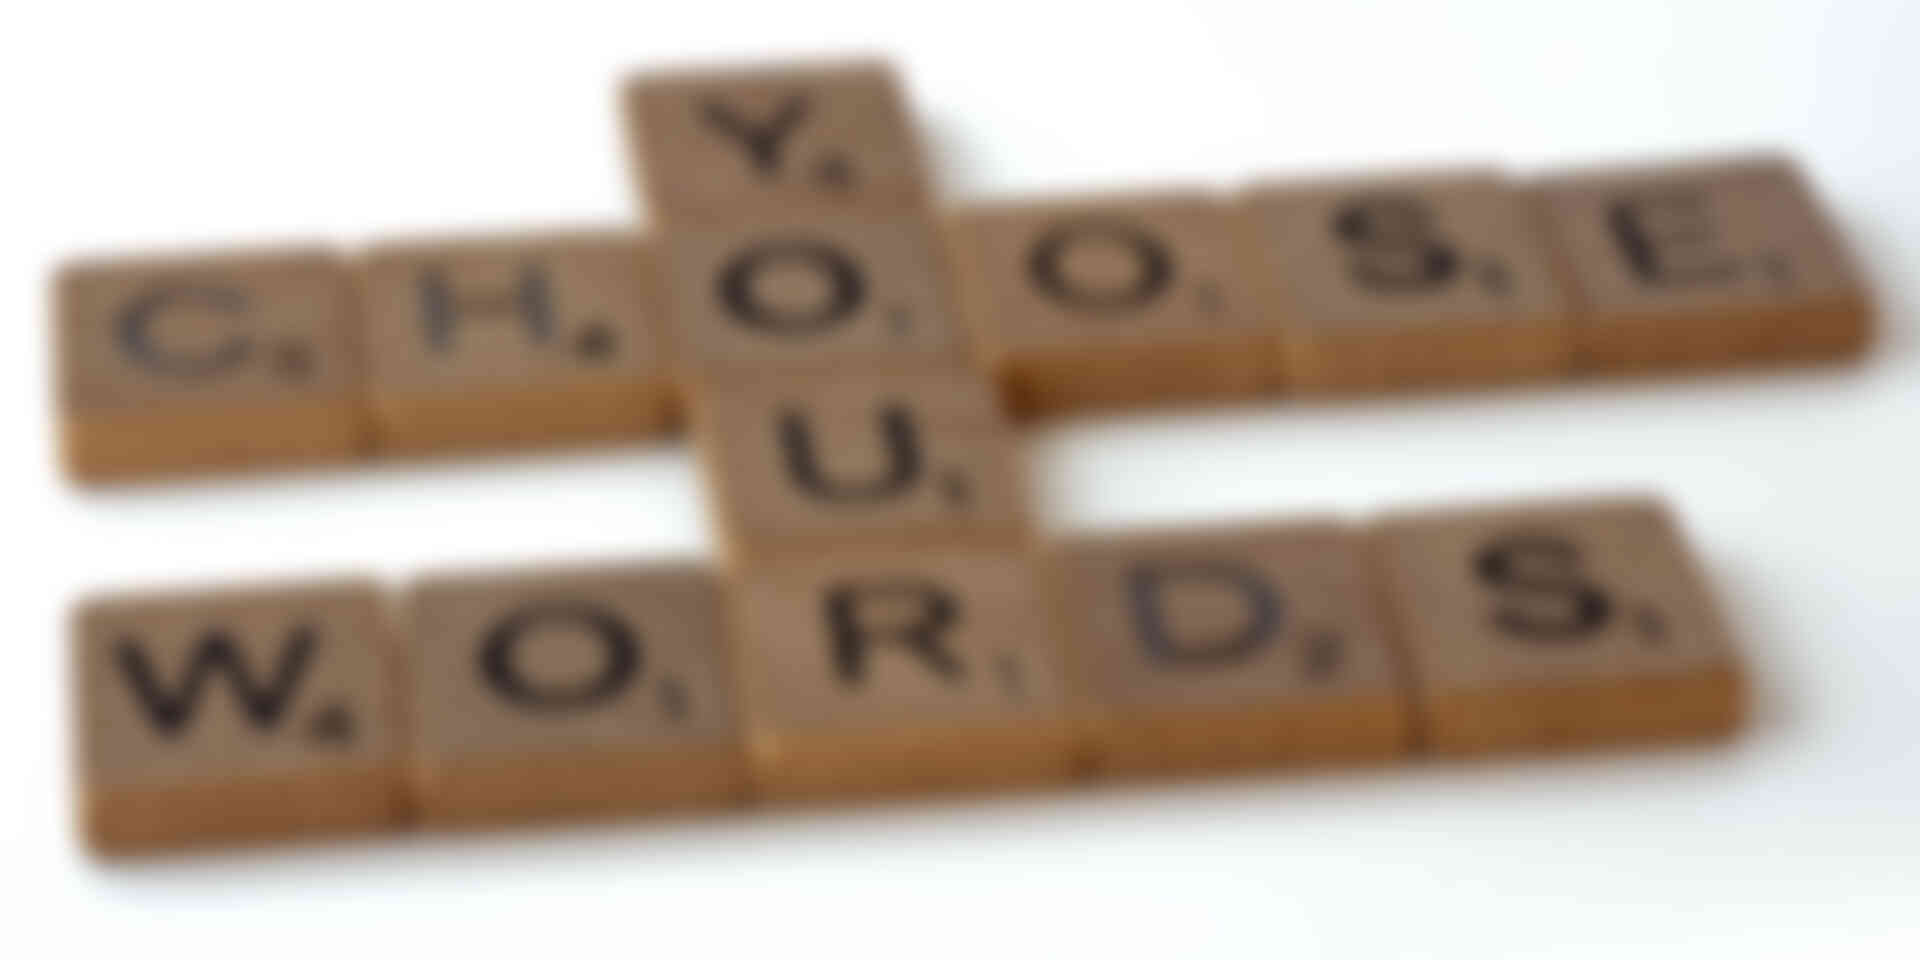 Crafting a helpful out of office message - choose-your-words-game-pieces